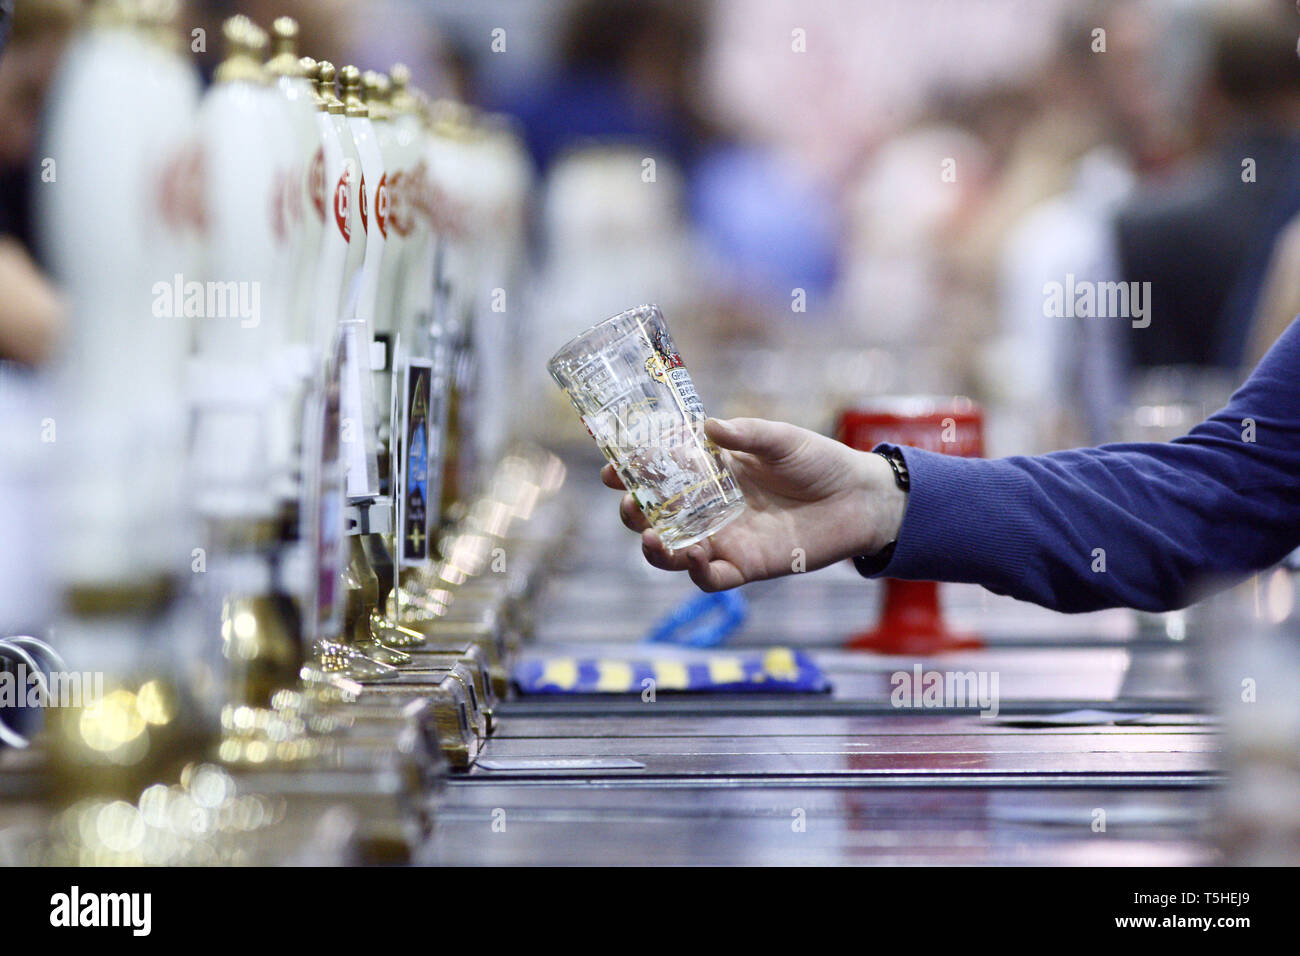 Buying a pint at The Great British Beer Festival, Earls Court, London. 5.8.10 Stock Photo